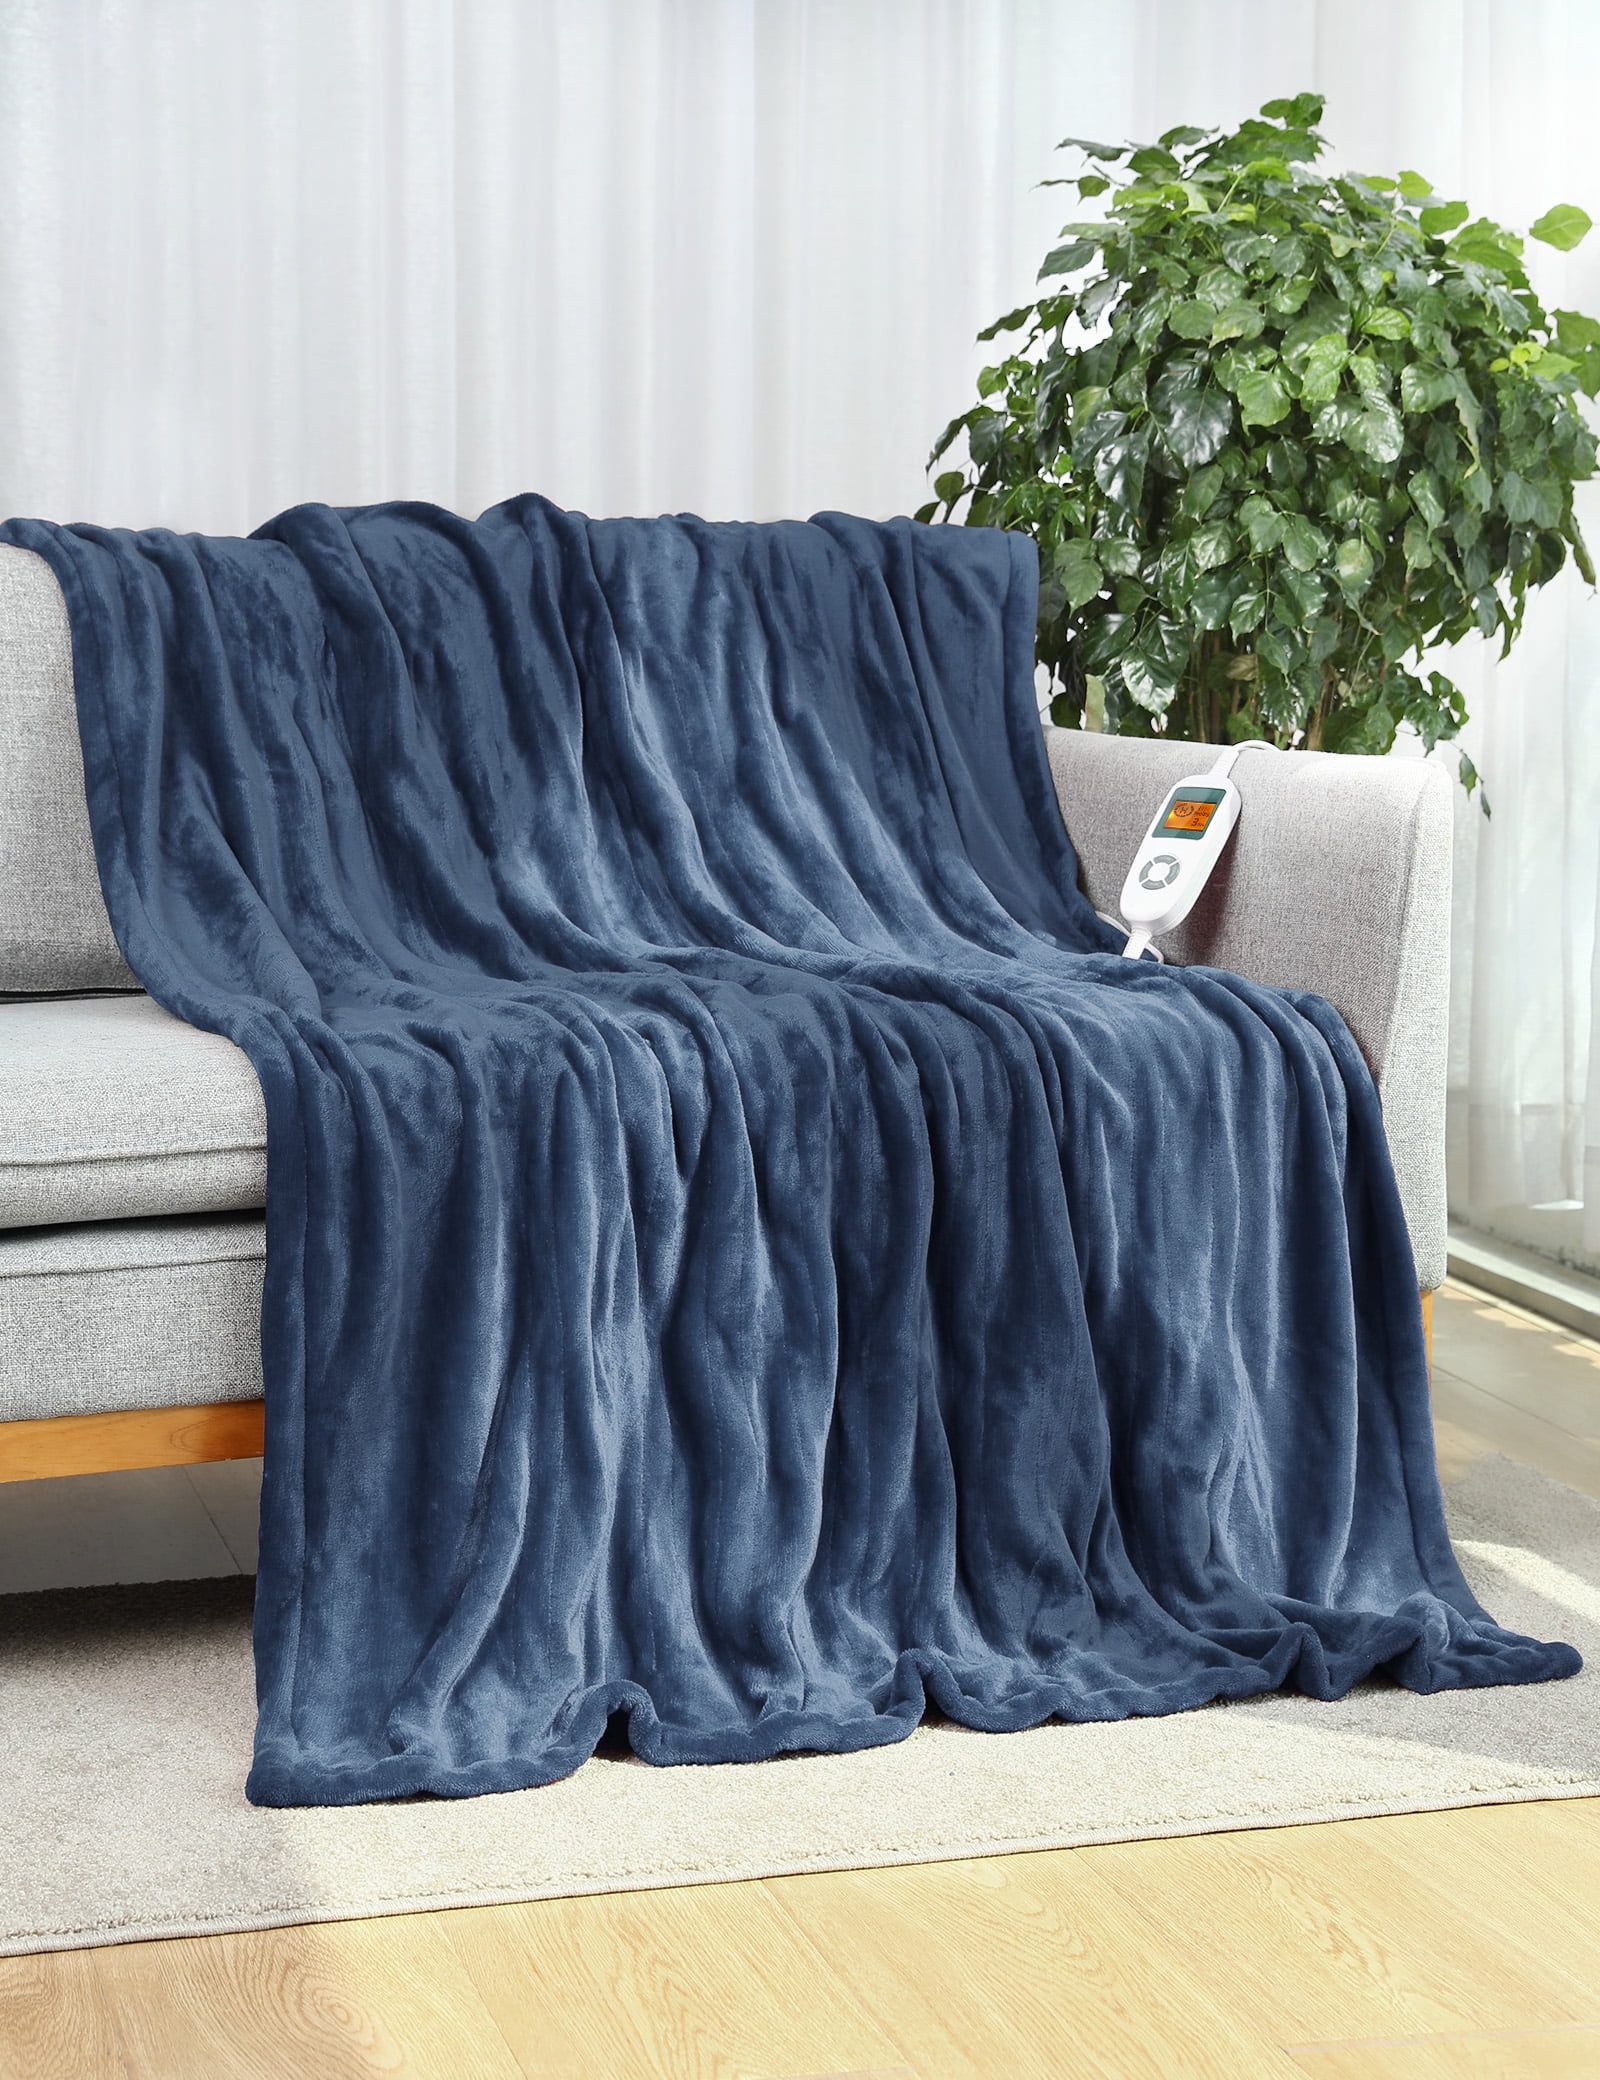 Homehours Faraday Blanket for Sleeping, Big Size 50IN * 60IN 127CM * 152CM  Thick Faraday Blanket for Belly, Warm White Berber Fleece and Navy Blue  Flannel with Faraday Fabric